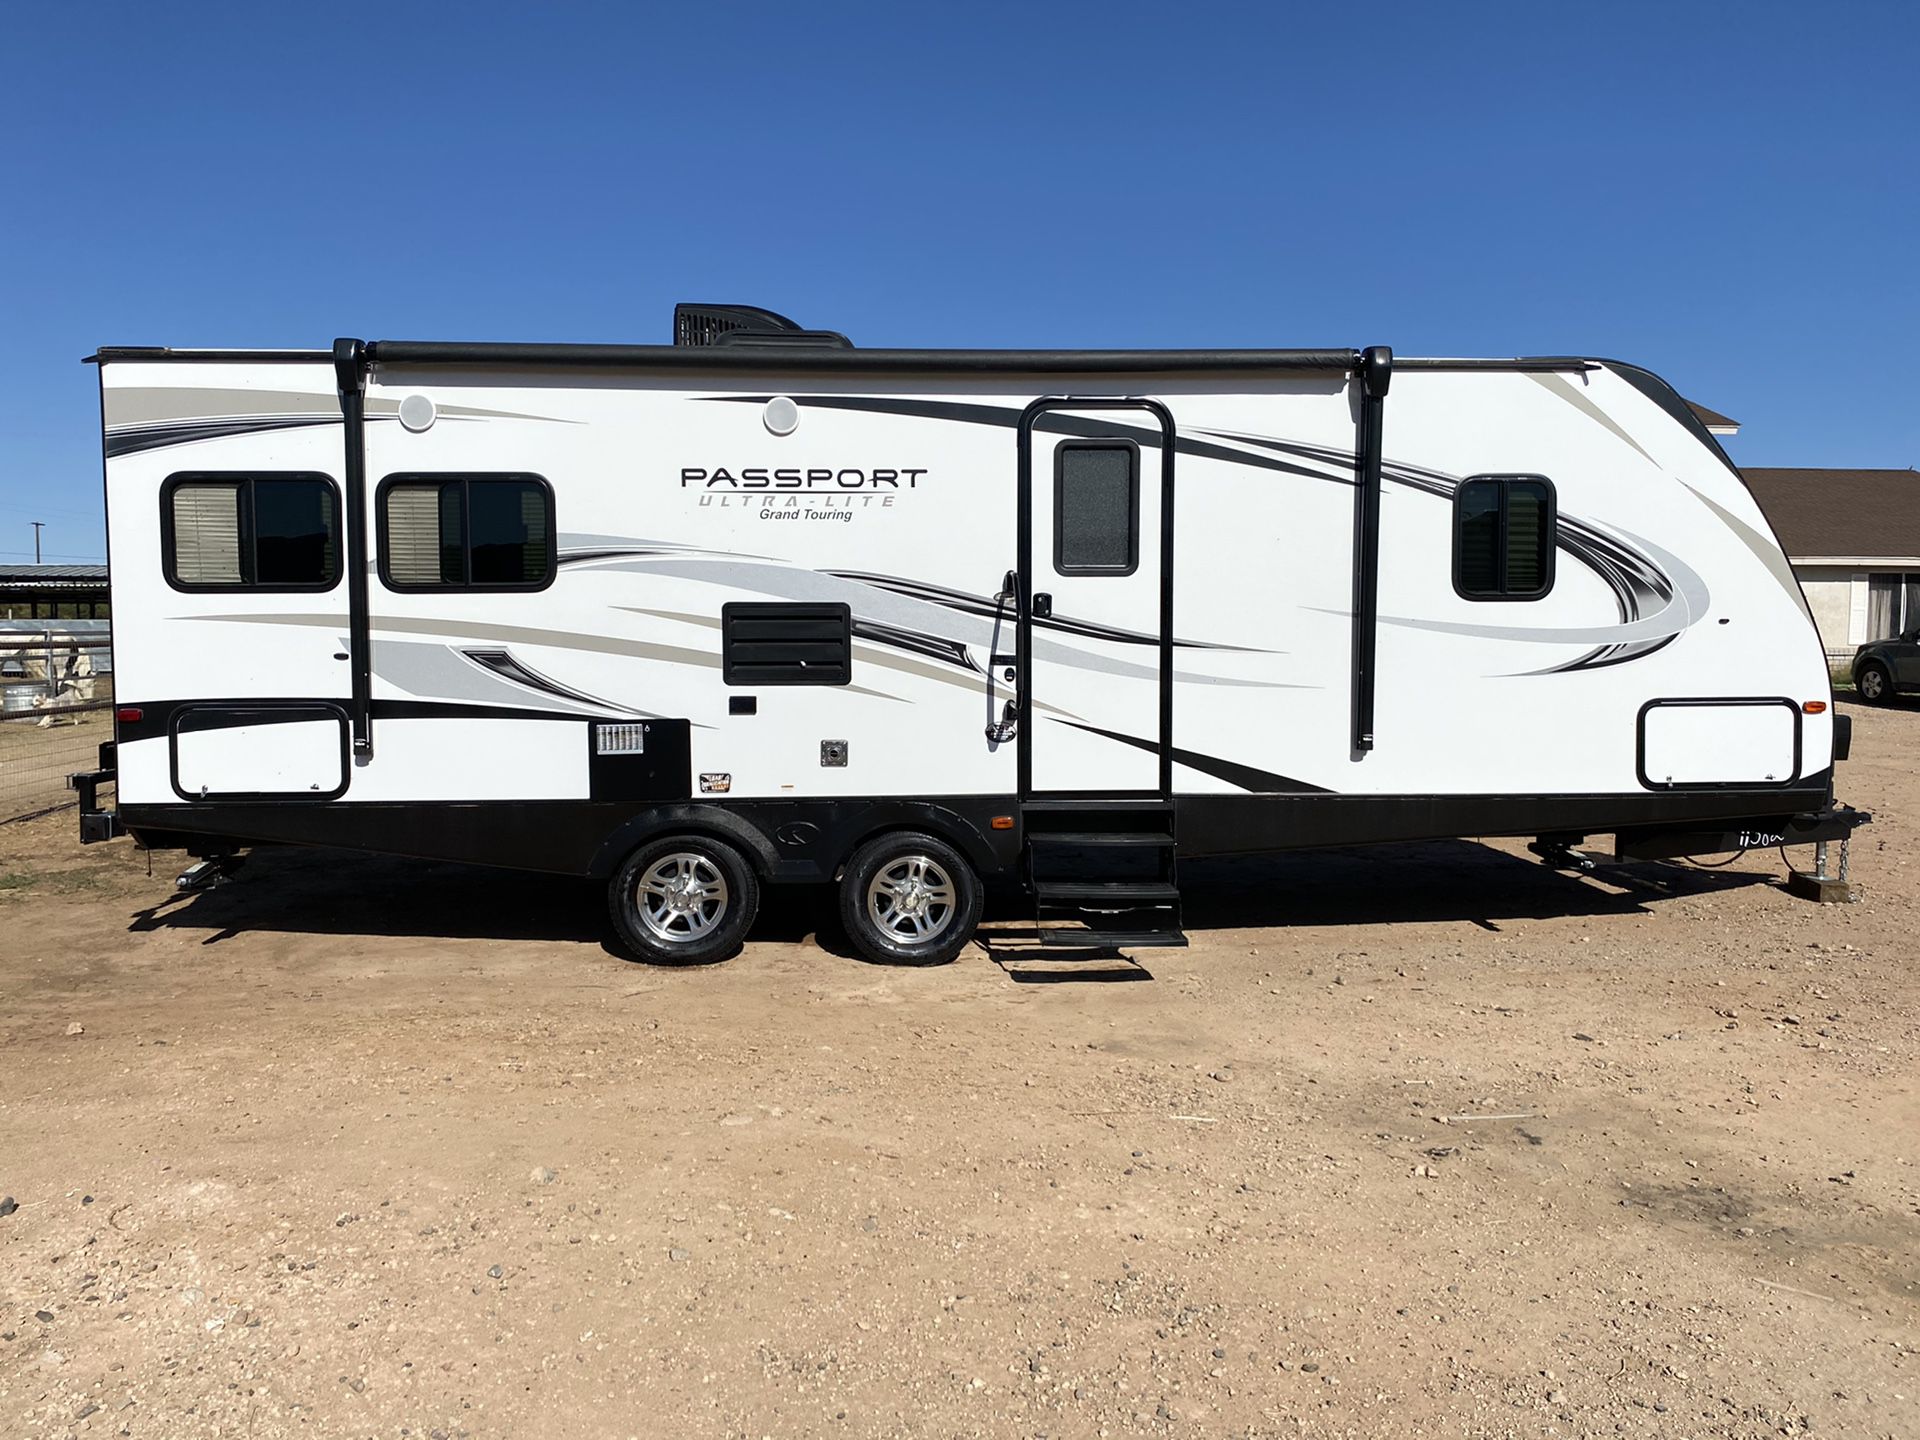 2019 Passport UltraLite grand touring 25 foot travel trailer with one large slide garage kept since brand new in immaculate condition